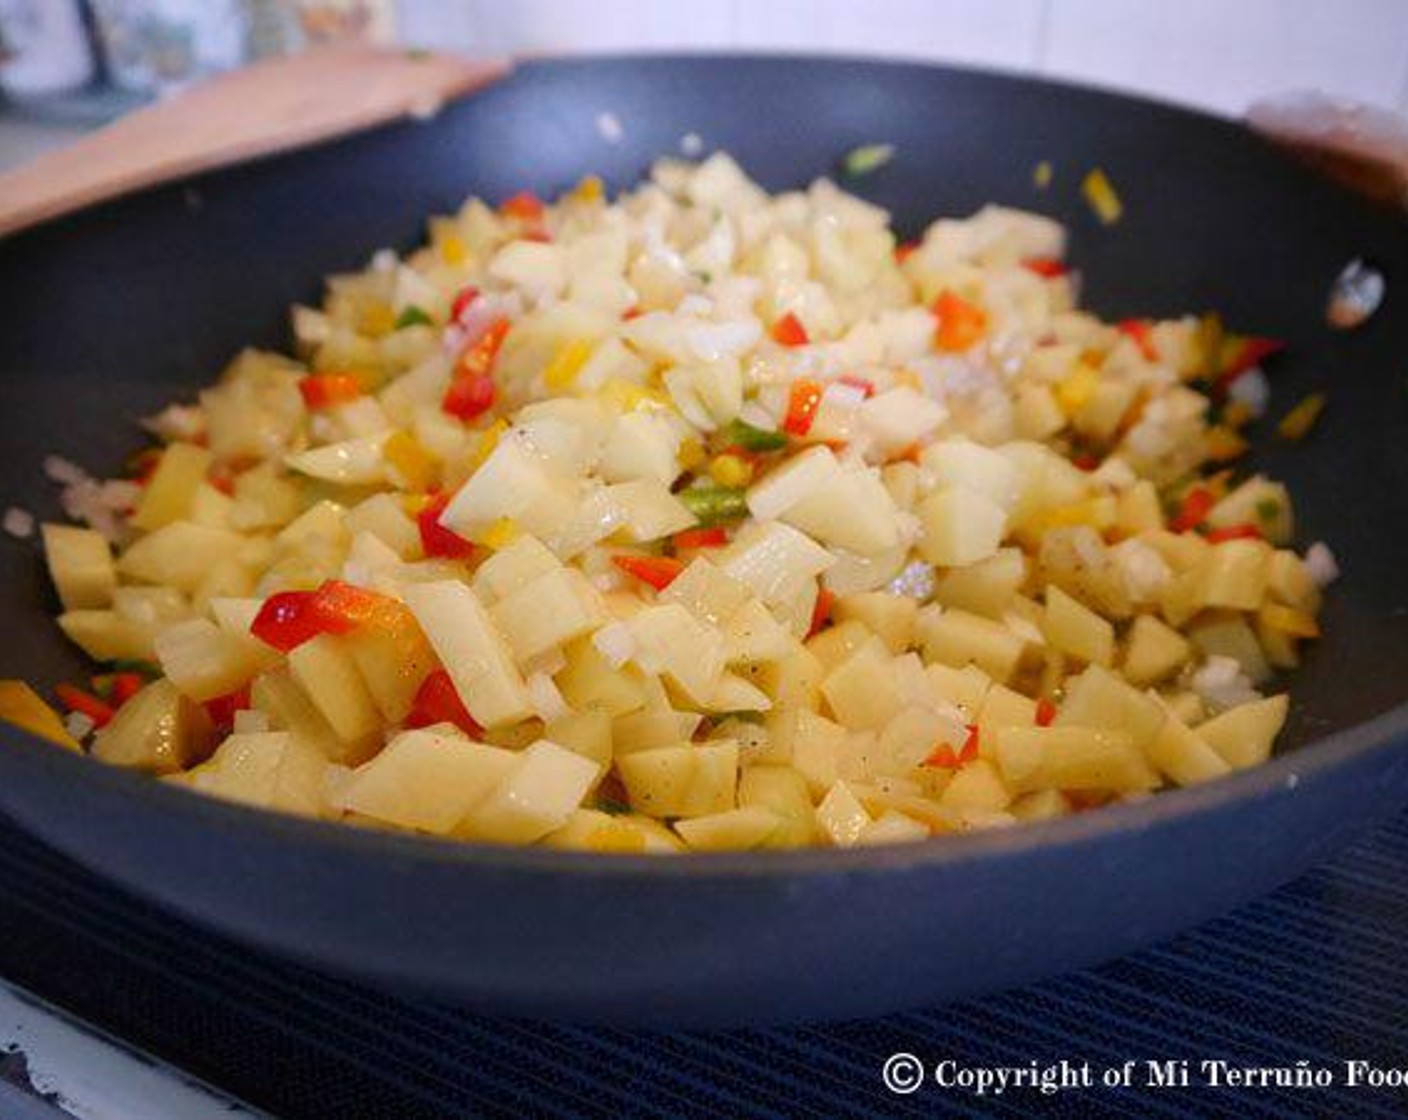 step 3 In a deep pan, place Olive Oil (1 cup). Once the oil is hot add the potatoes, peppers, and onion and toss everything together well. Cook for about 20 minutes until everything is soft.